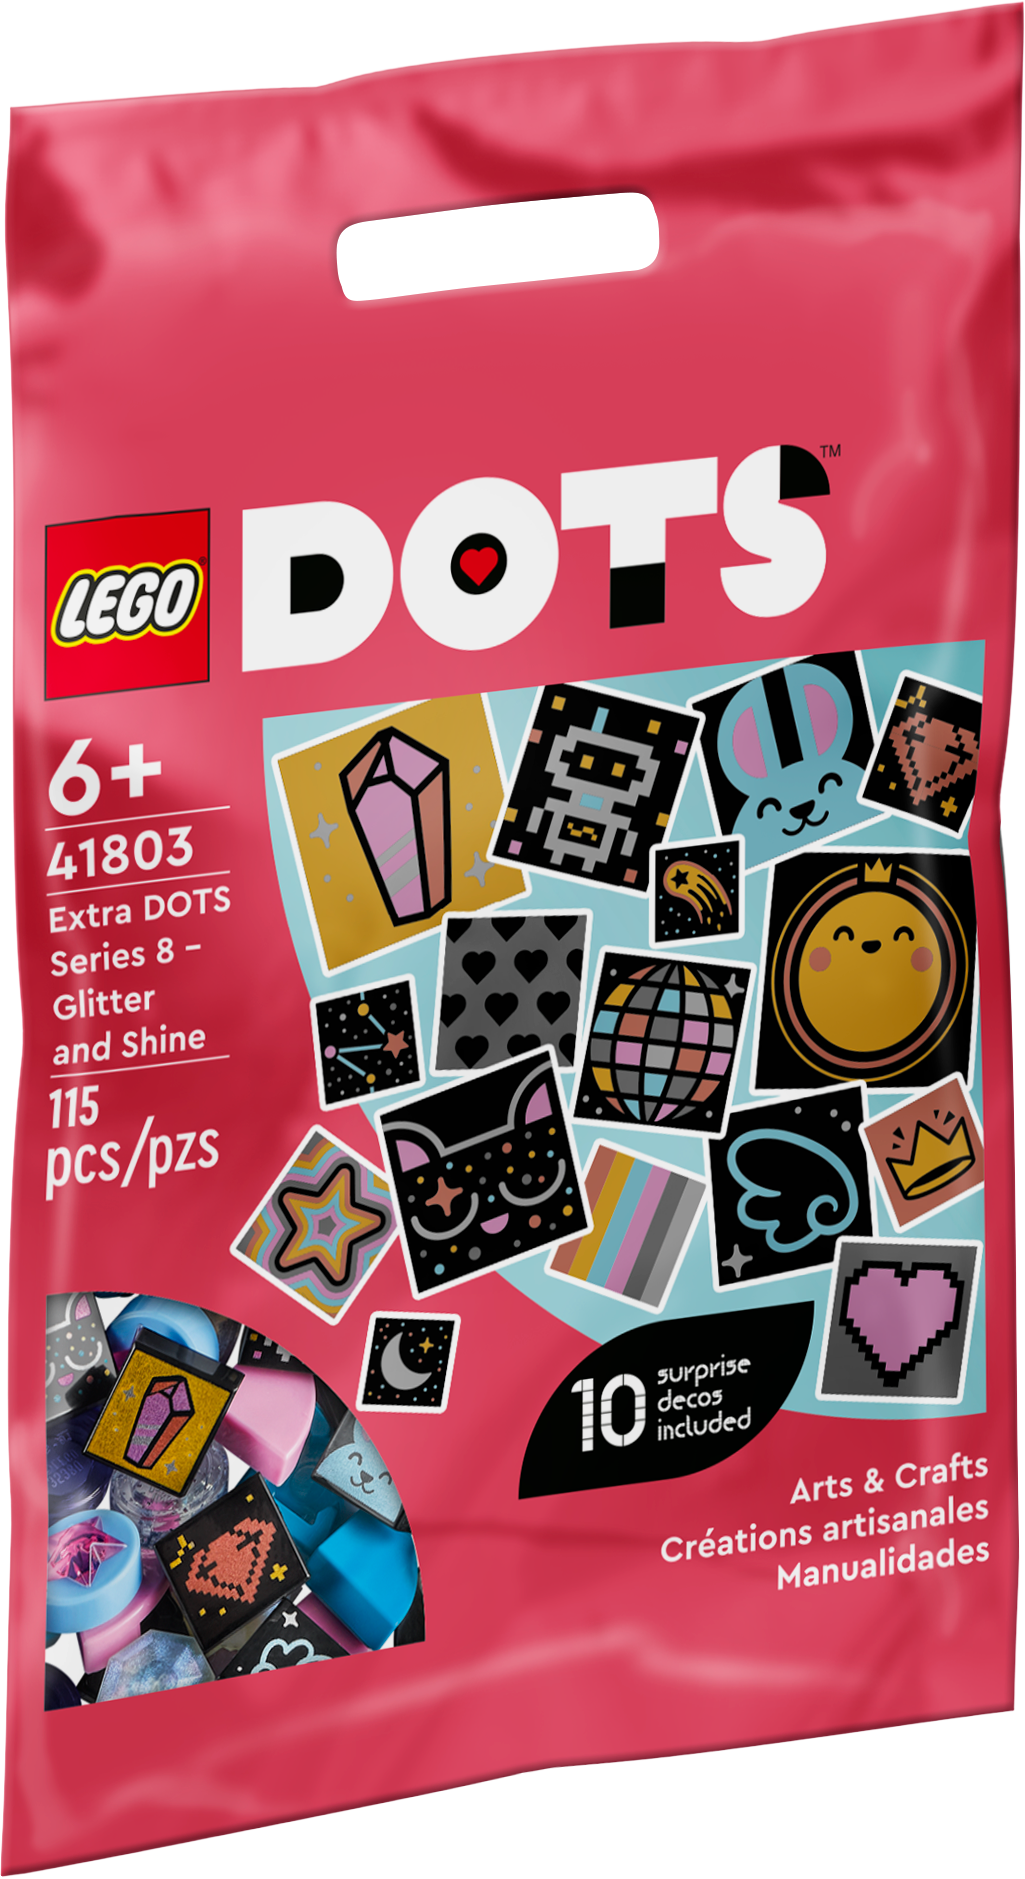 41803 Extra DOTS Series 8 - Glitter and Shine (Retired) LEGO DOTS